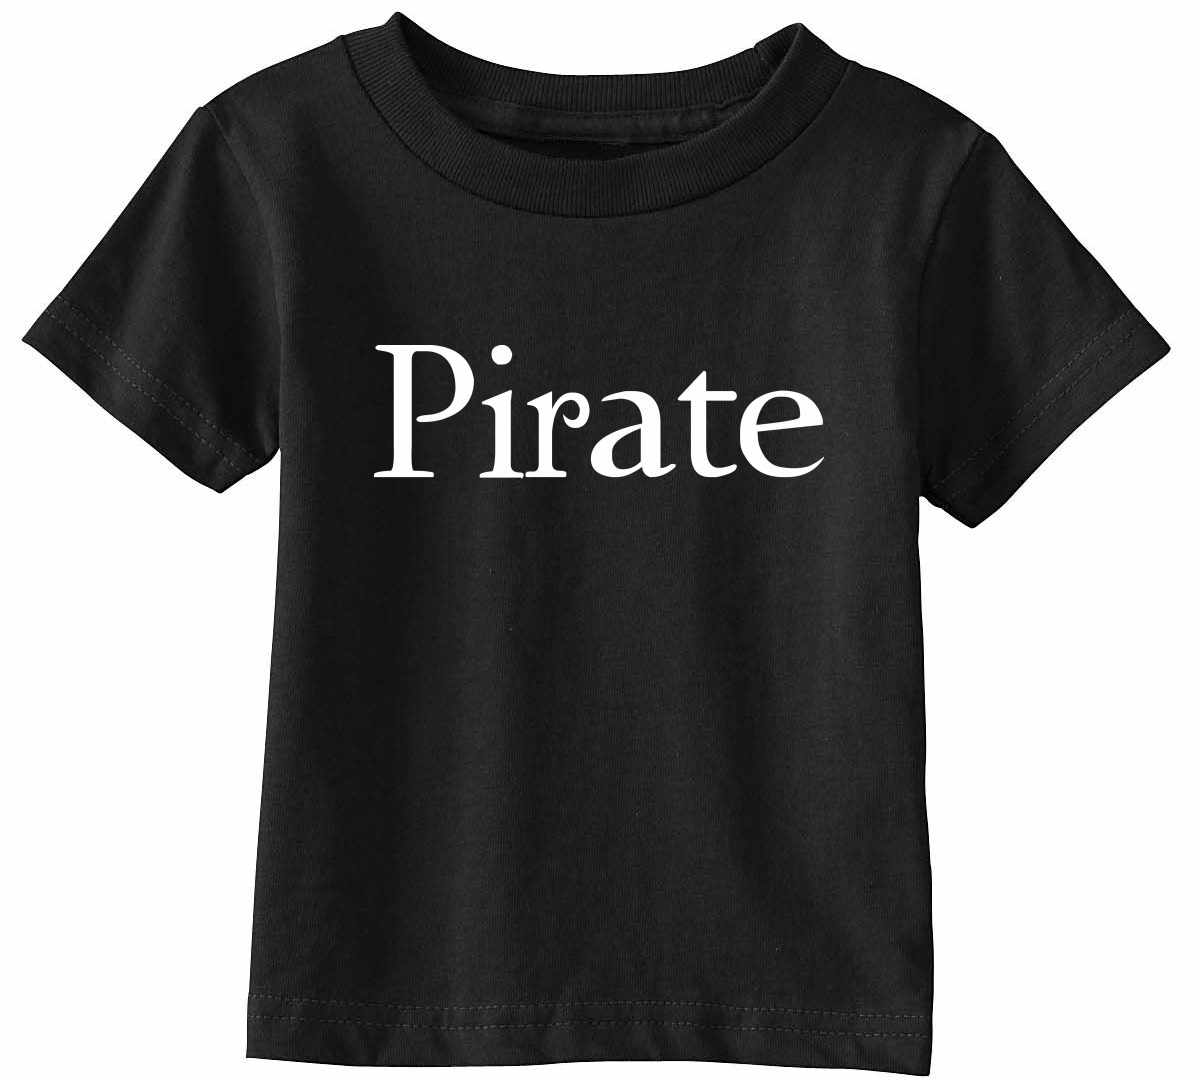 Pirate Infant/Toddler 